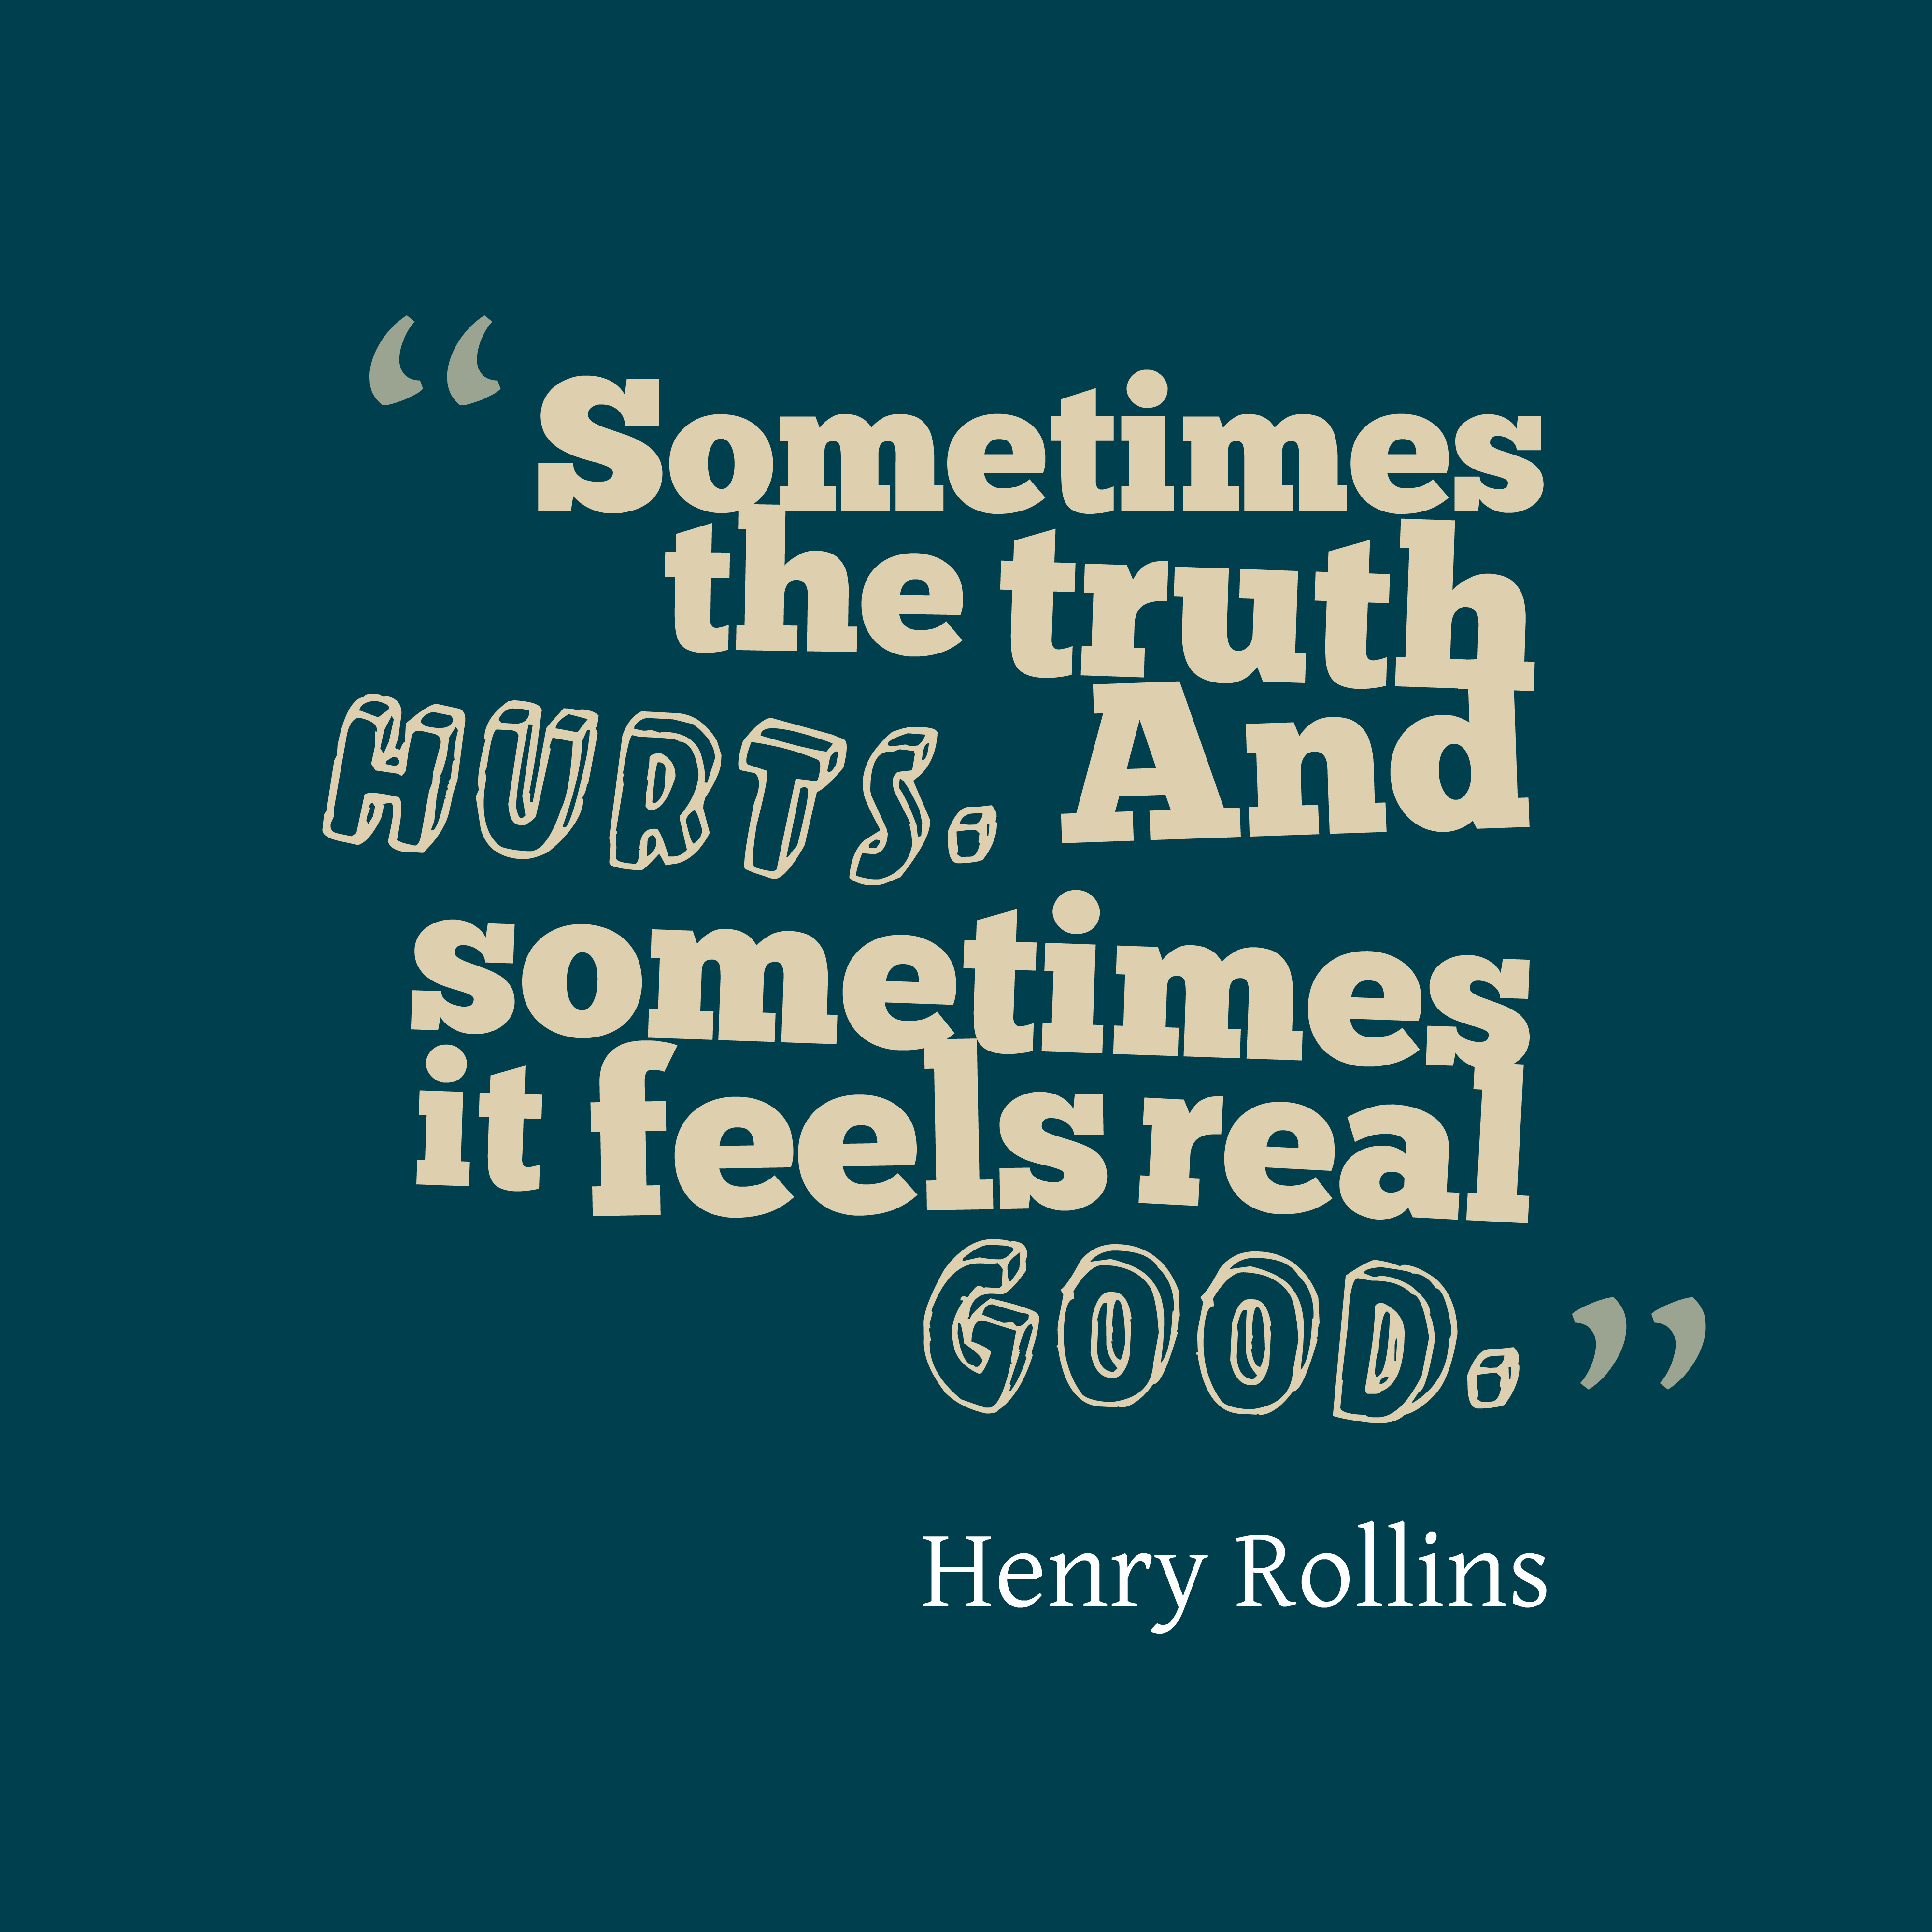 Sometimes the truth hurts. And sometimes it feels real good. Henry Rollins